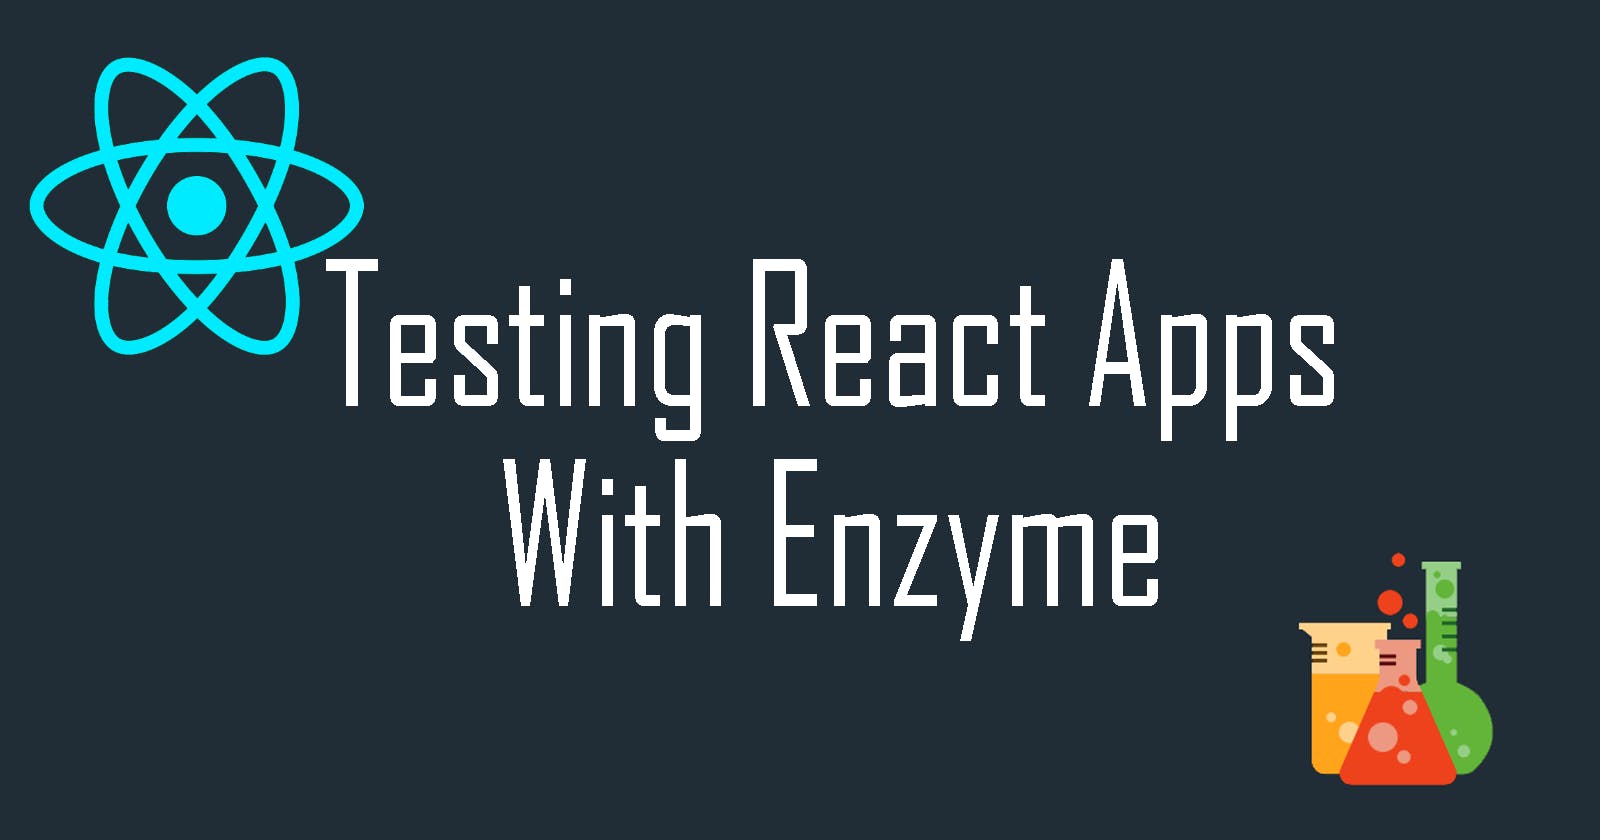 Testing React Components and Apps with Enzyme